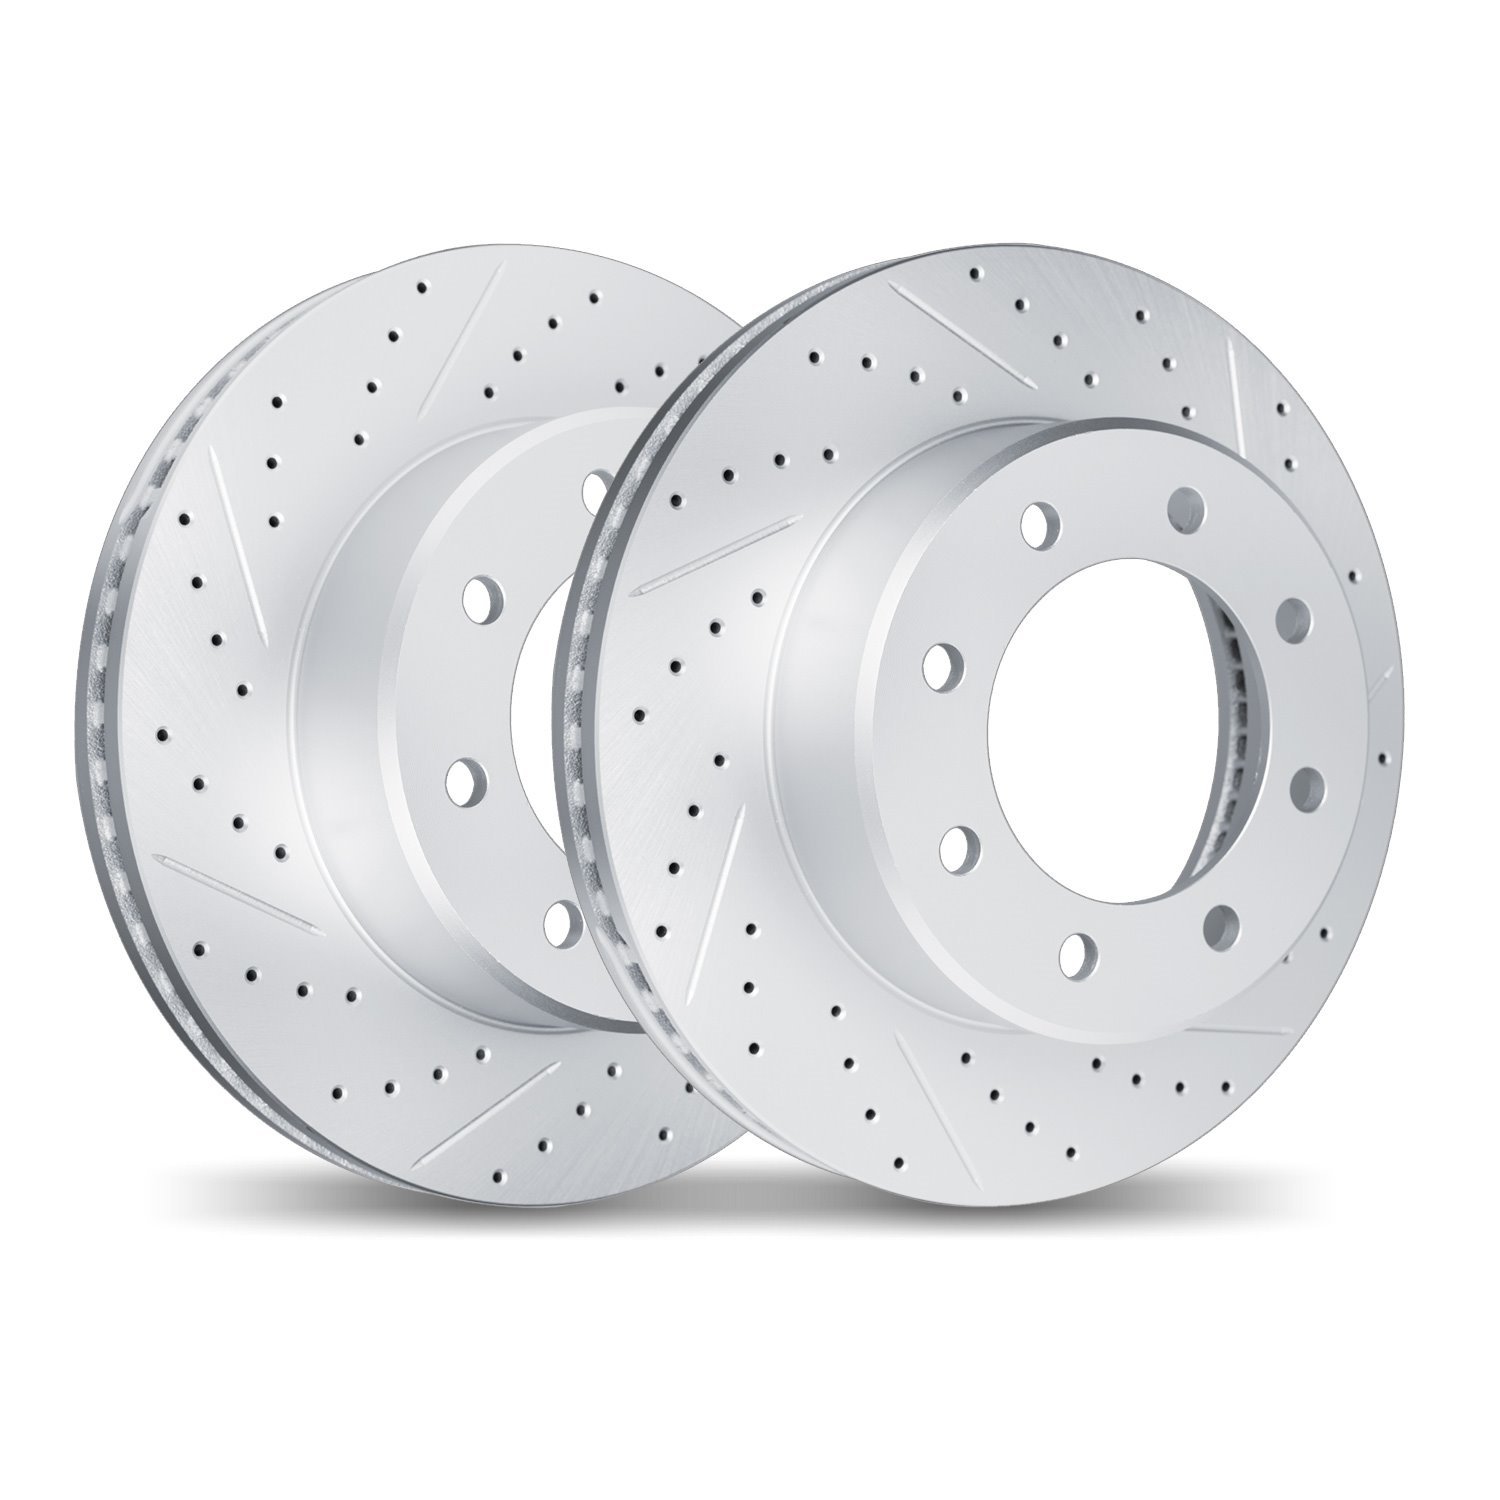 2002-54017 Geoperformance Drilled/Slotted Brake Rotors, 1995-2007 Ford/Lincoln/Mercury/Mazda, Position: Front